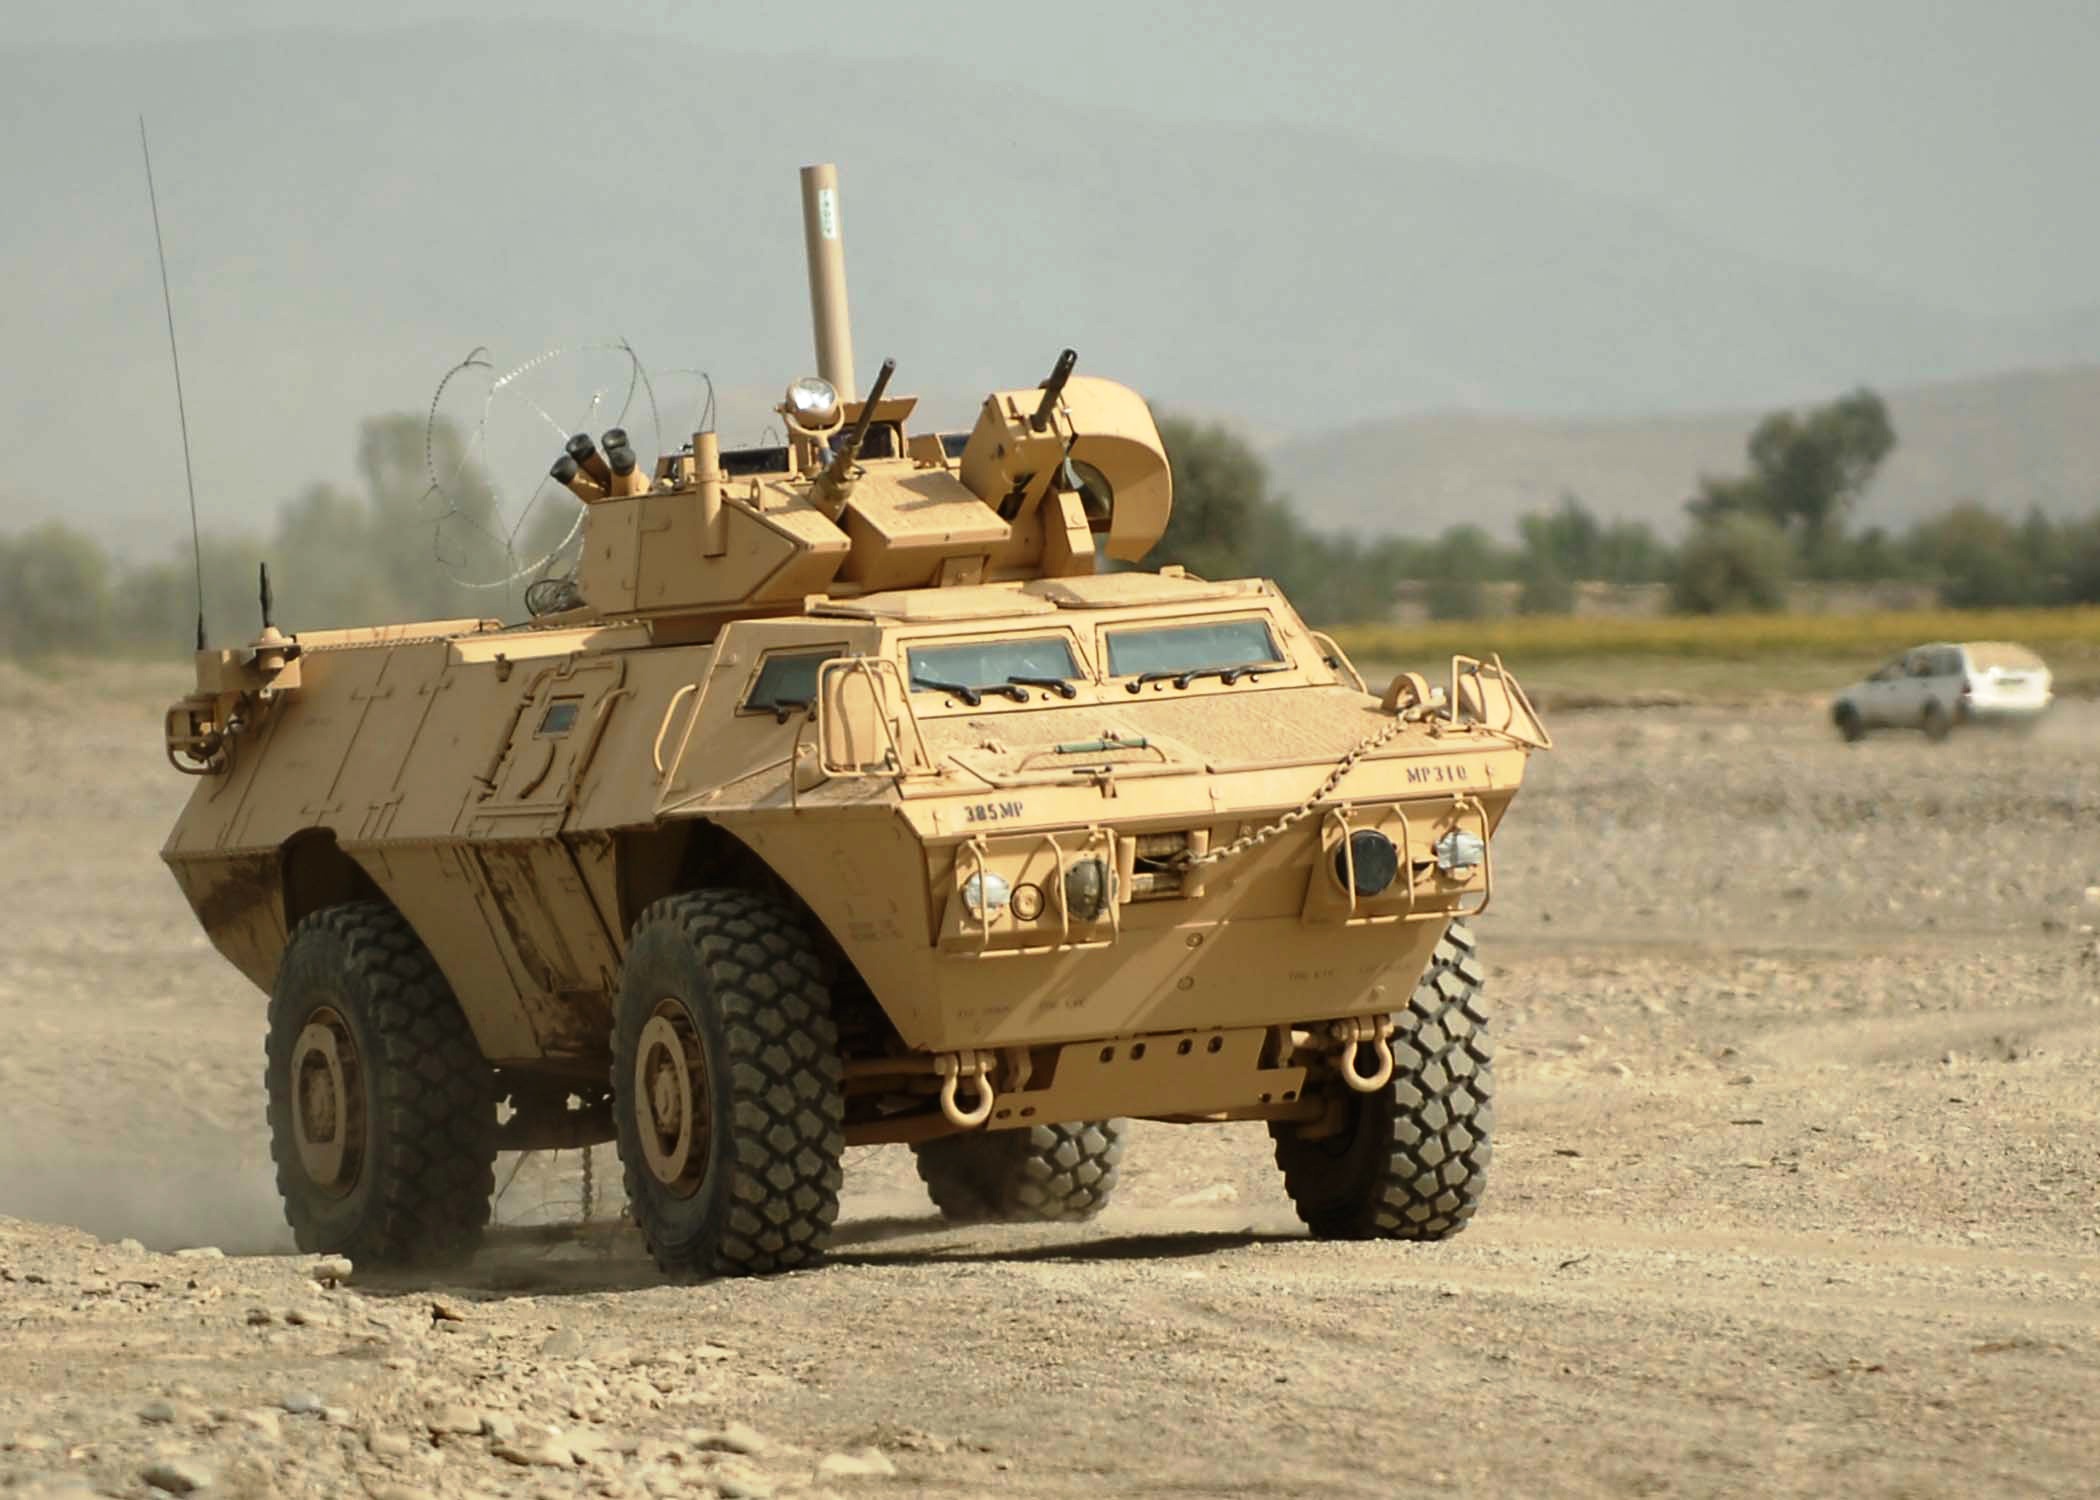 http://upload.wikimedia.org/wikipedia/commons/6/6b/M1117_Armored_Security_Vehicle.jpg